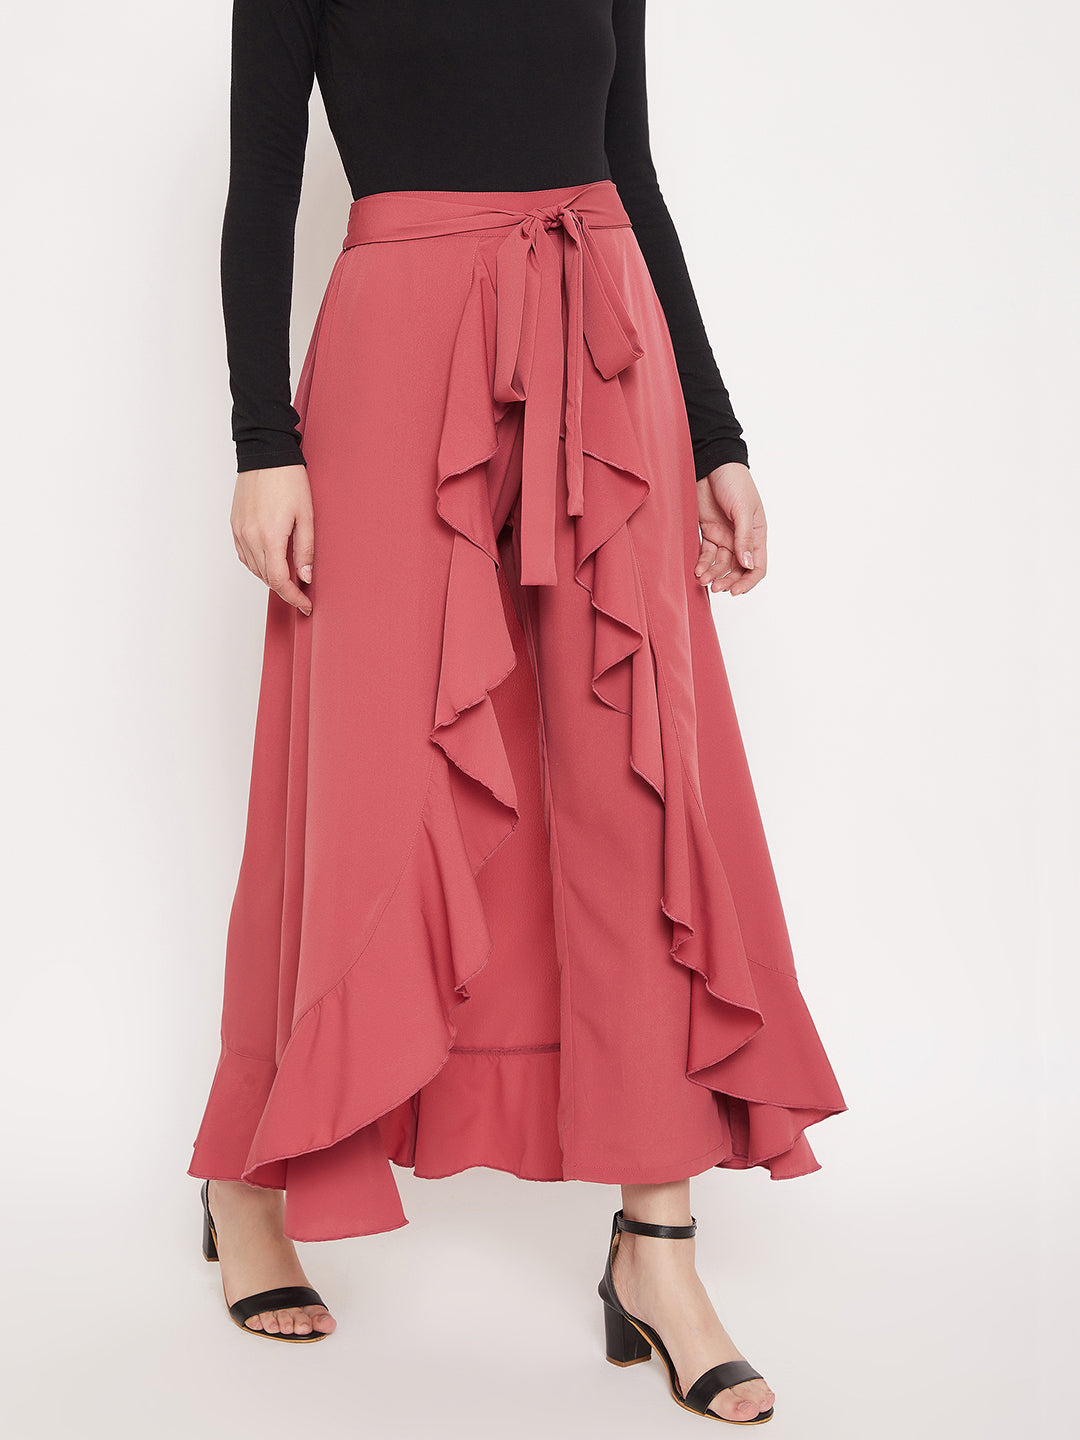 Berrylush Women Solid Pink Waist Tie-Up Ruffled Maxi Skirt With Attached Trousers